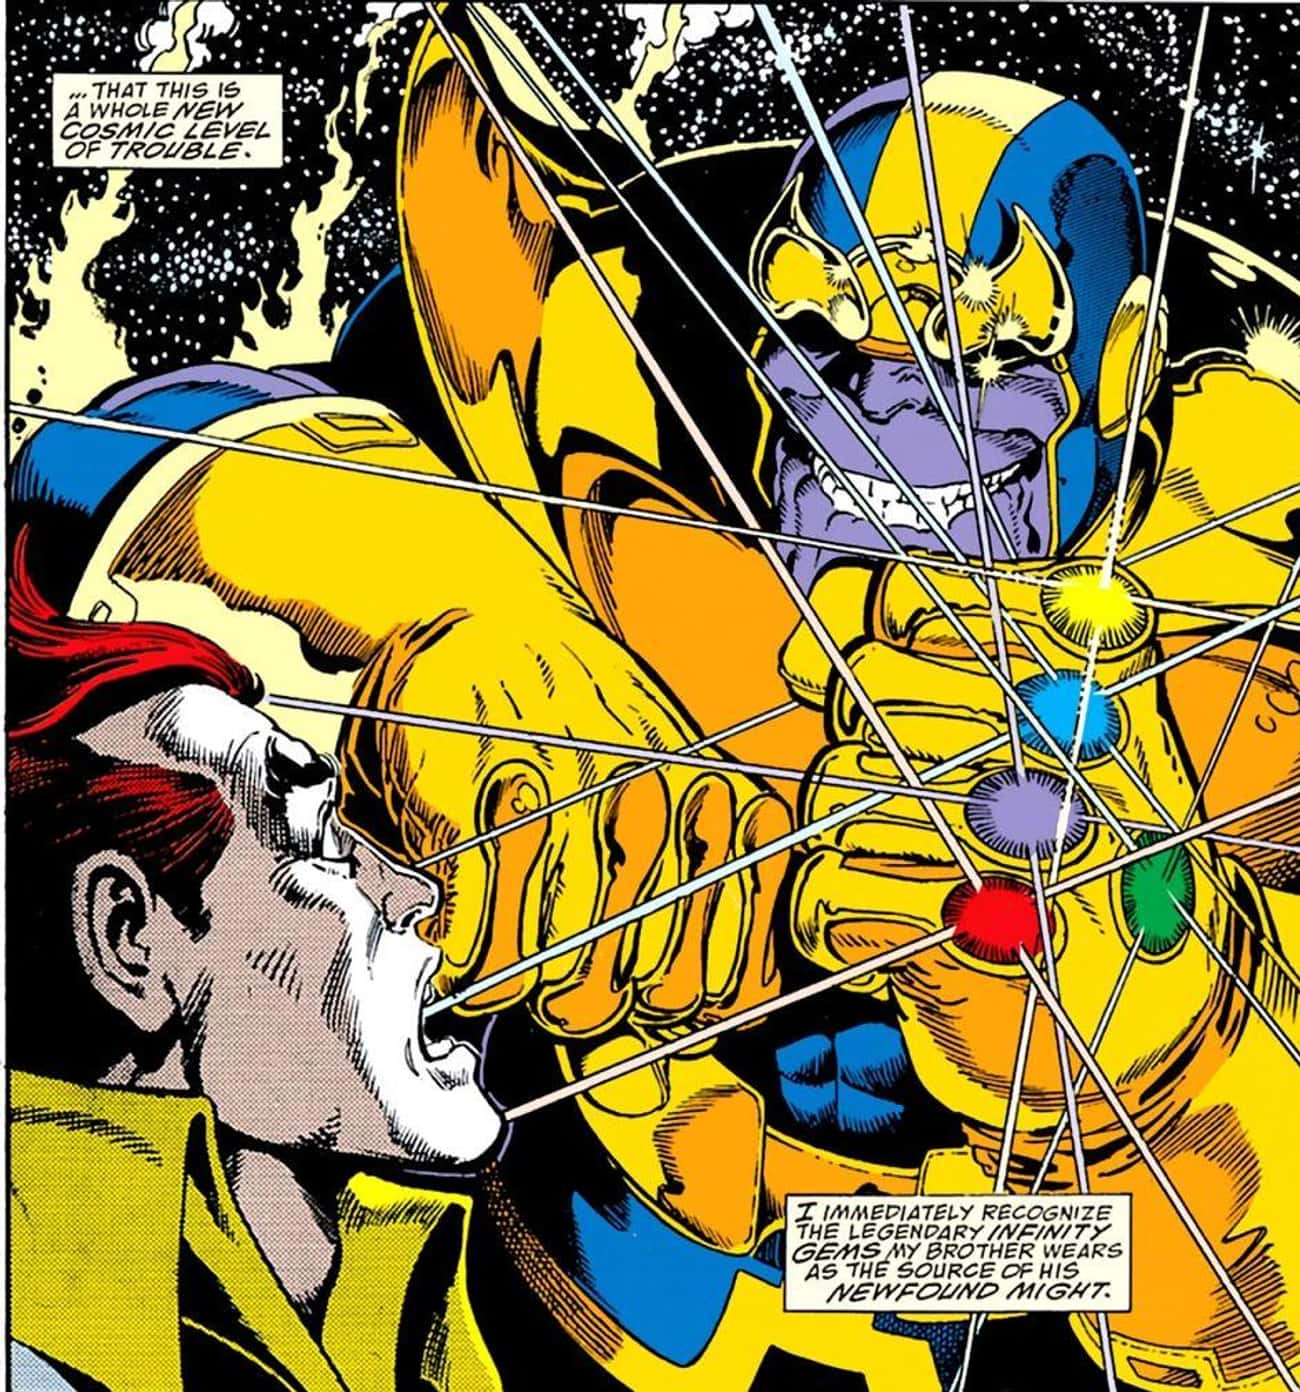 A Conflicted Thanos Gathers His Remaining “Family” To His Side, Then Tortures Them